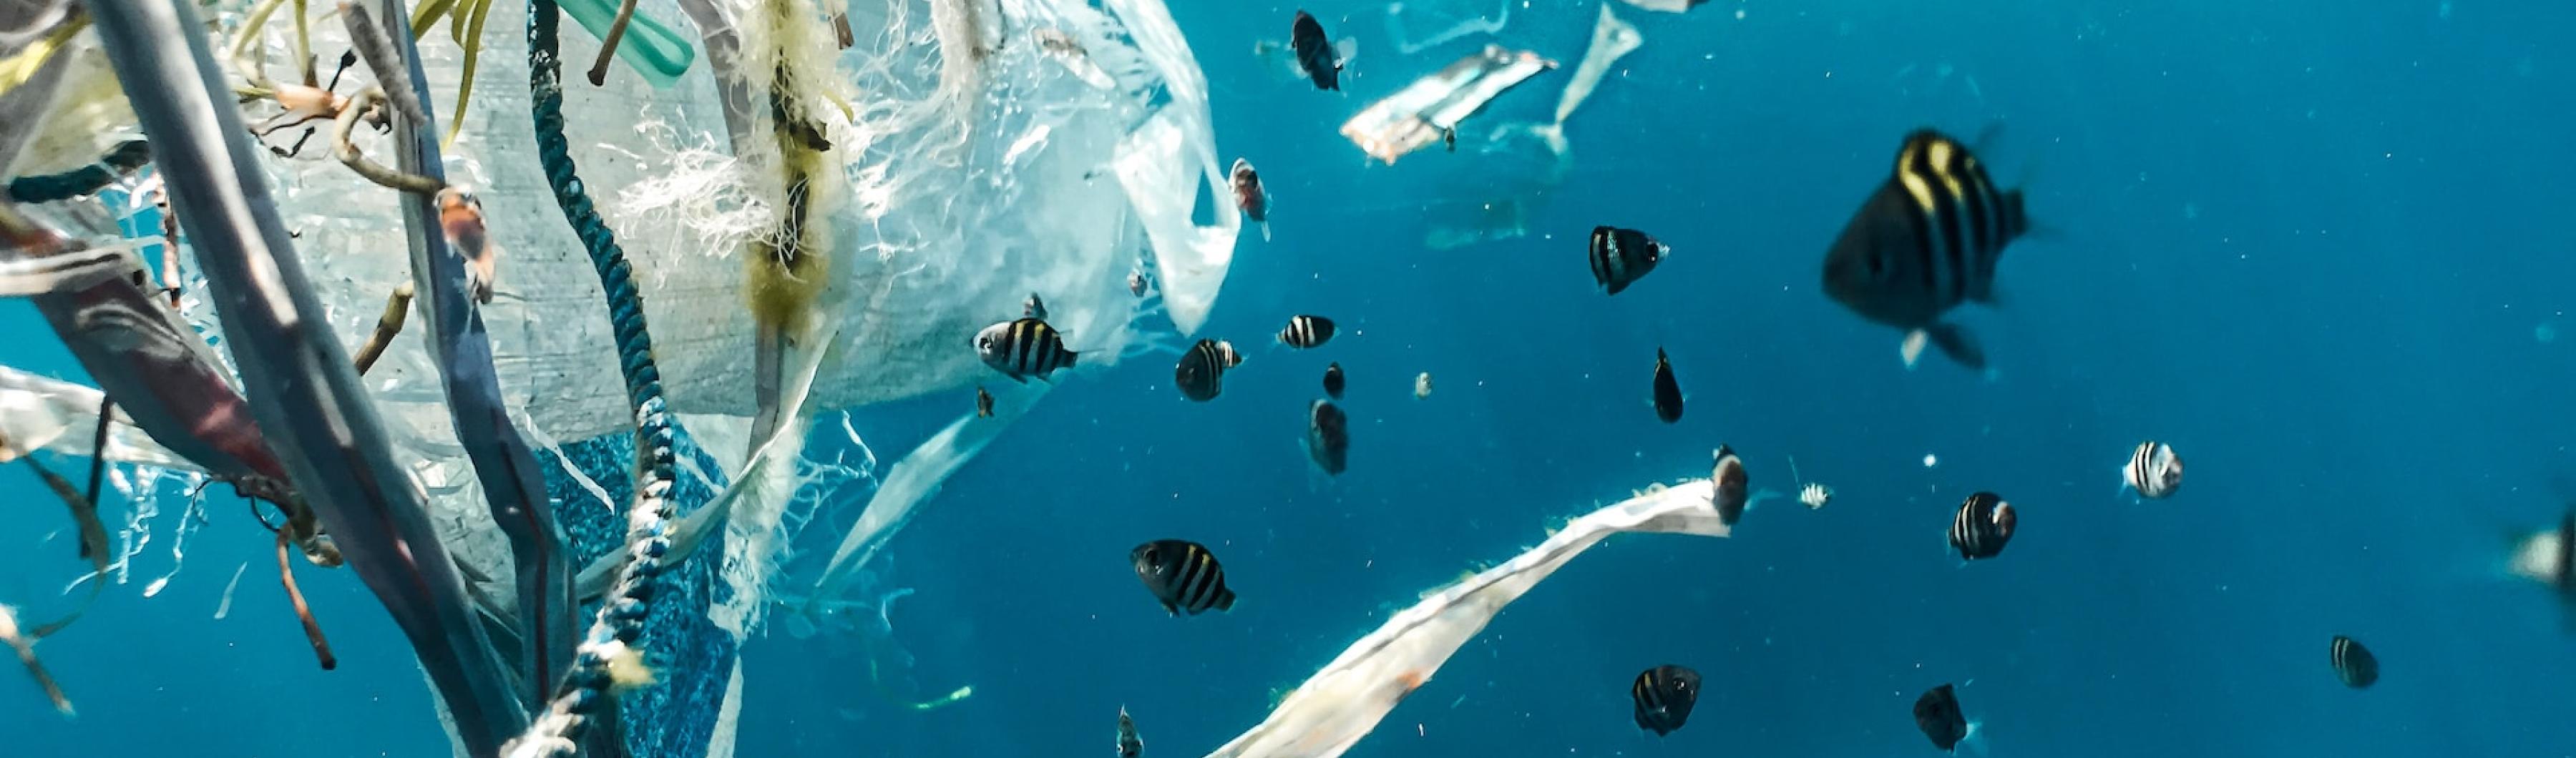 Fish in the ocean with plastic pollution